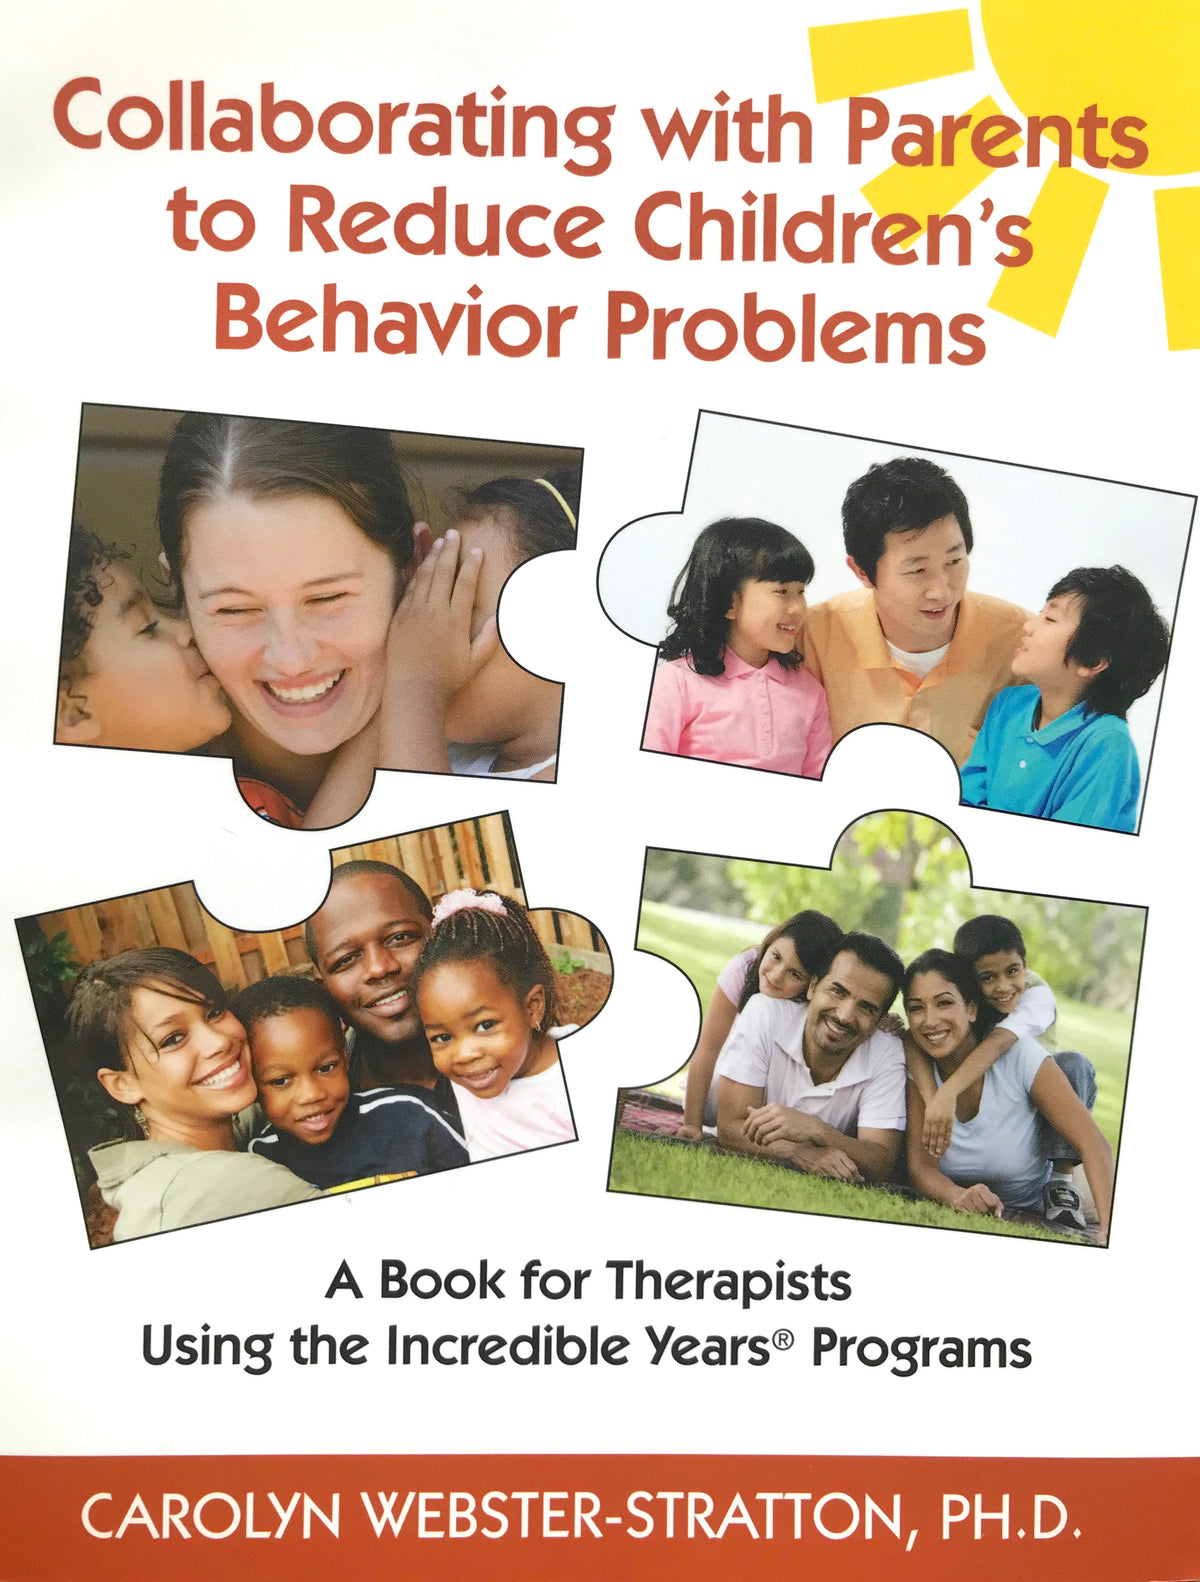 
              Collaborating with Parents to Reduce Children’s Behavior Problems: A Book for Therapists Using the Incredible Years Programs